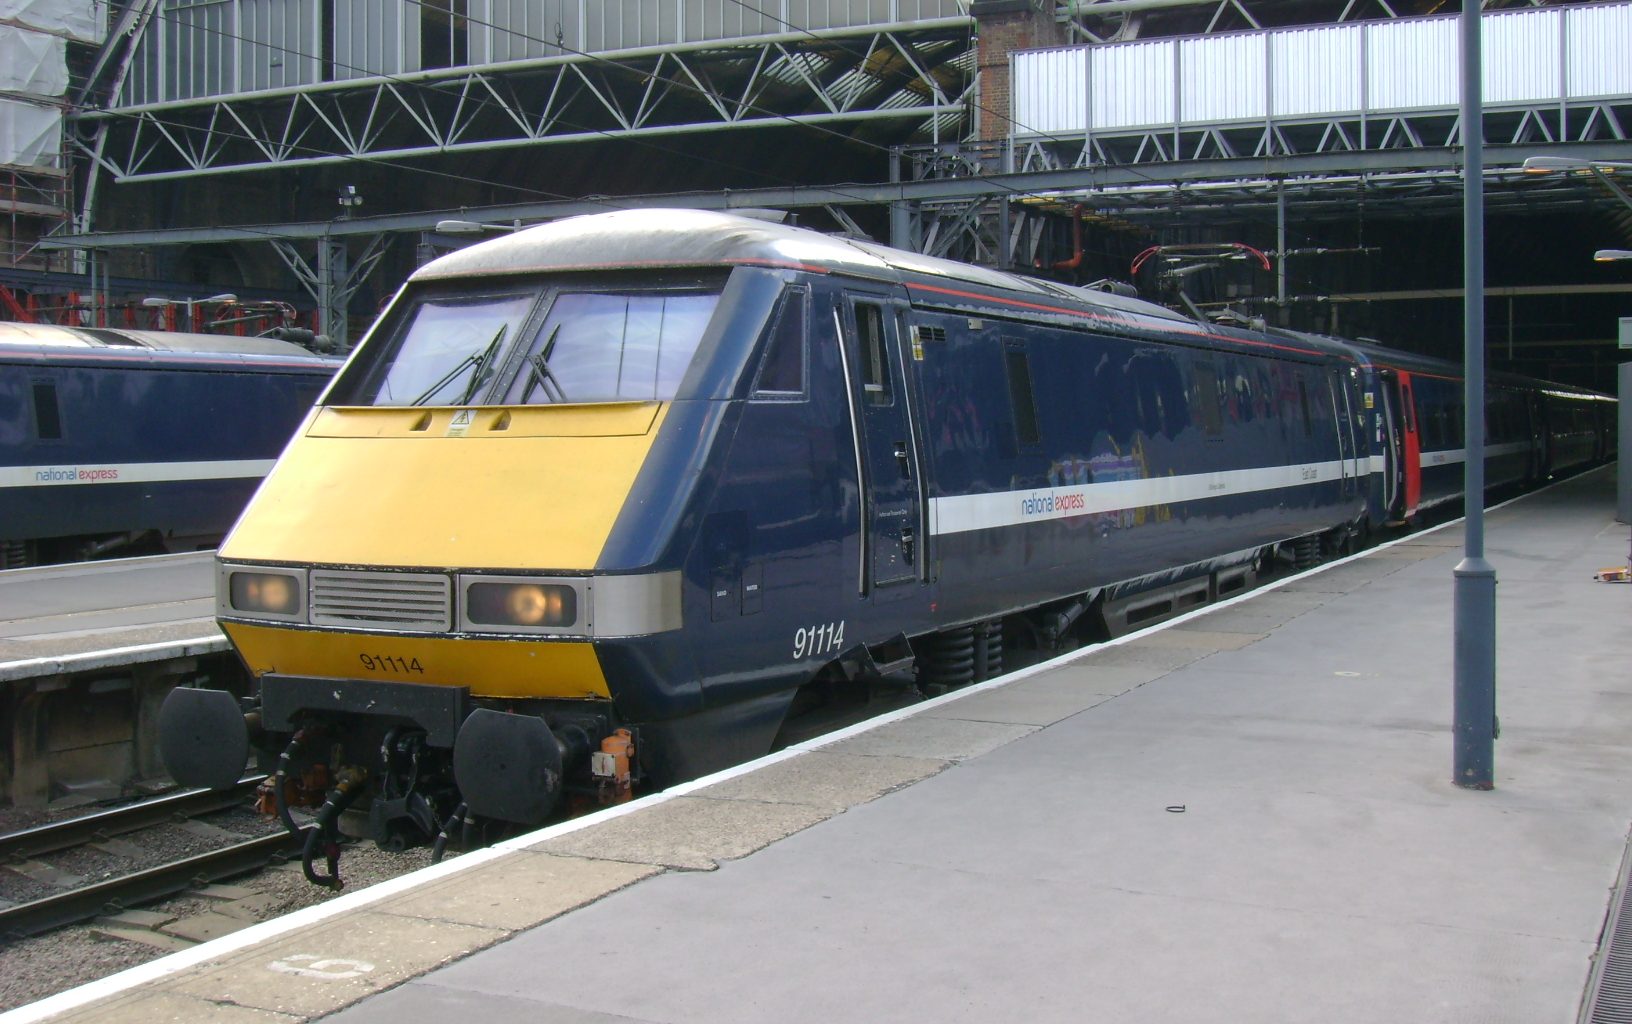 A class 91 in the platform at London Kings Cross